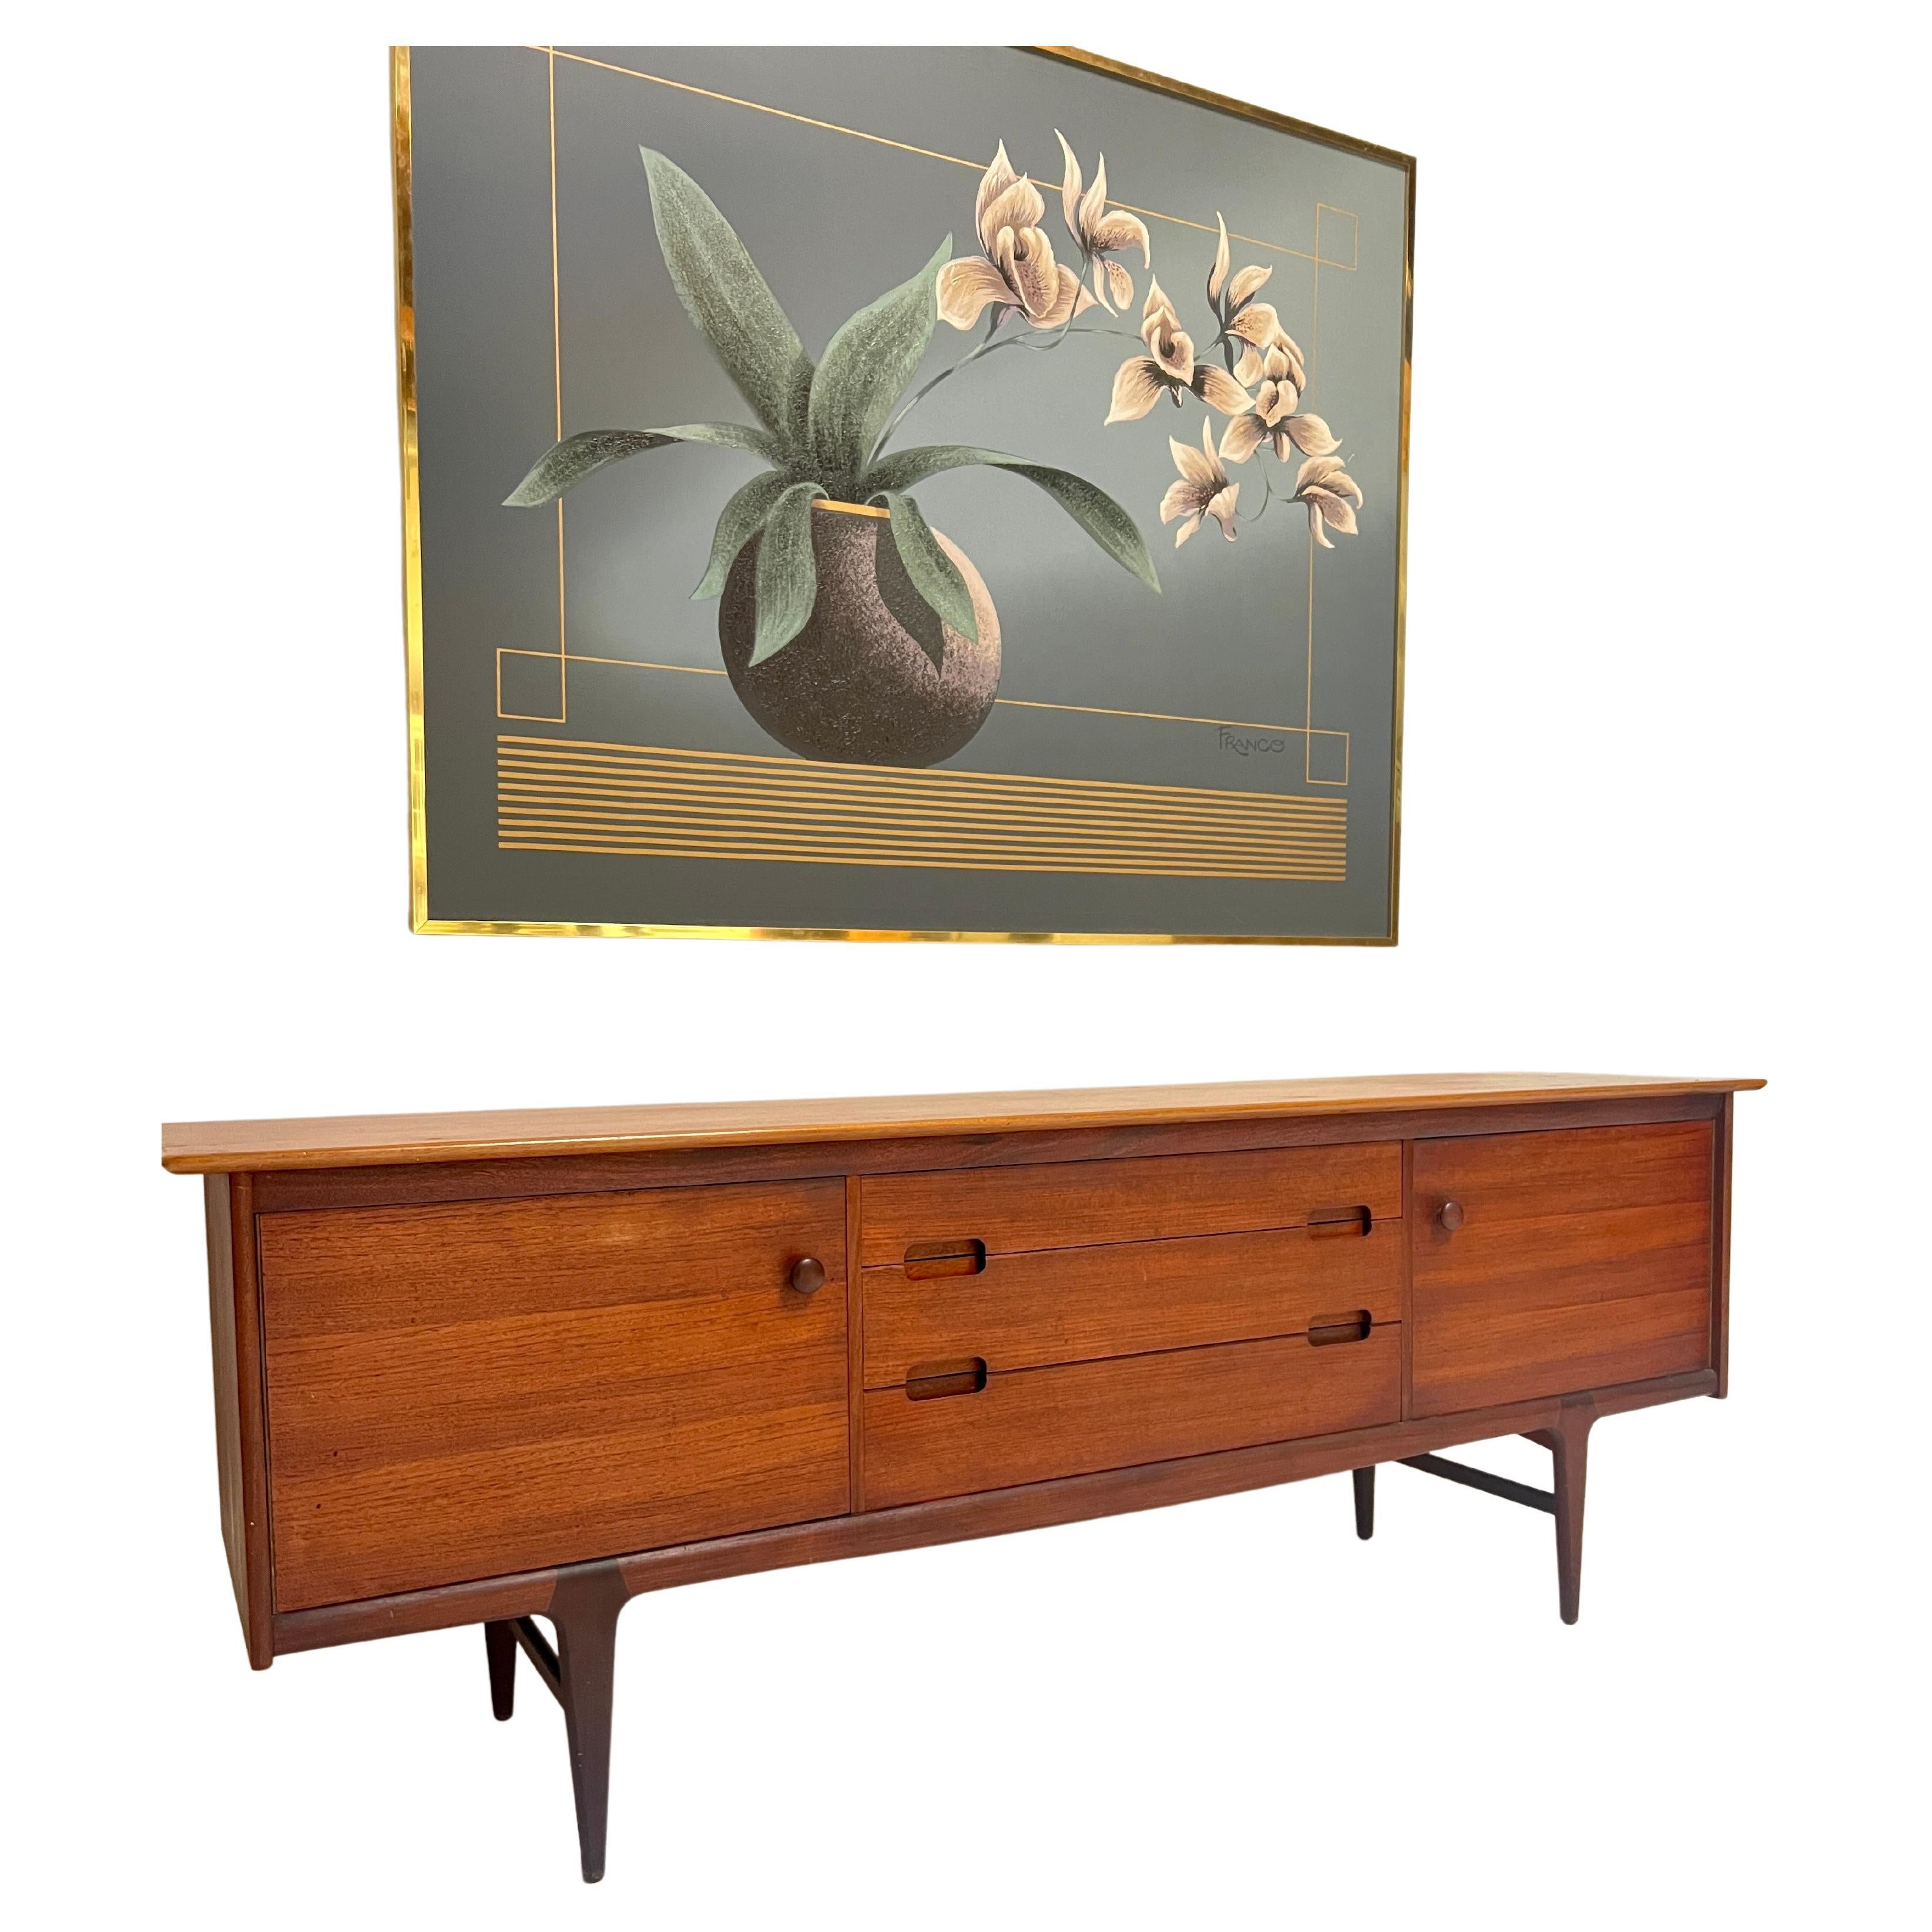 Beautiful vintage teak sideboard designed by John Herbert, part of the Fonseca line by A. Younger Furniture circa 1960's. It features solid teak and teak veneer construction, subtly curved edges, inset drawer pulls, turned teak door handles and